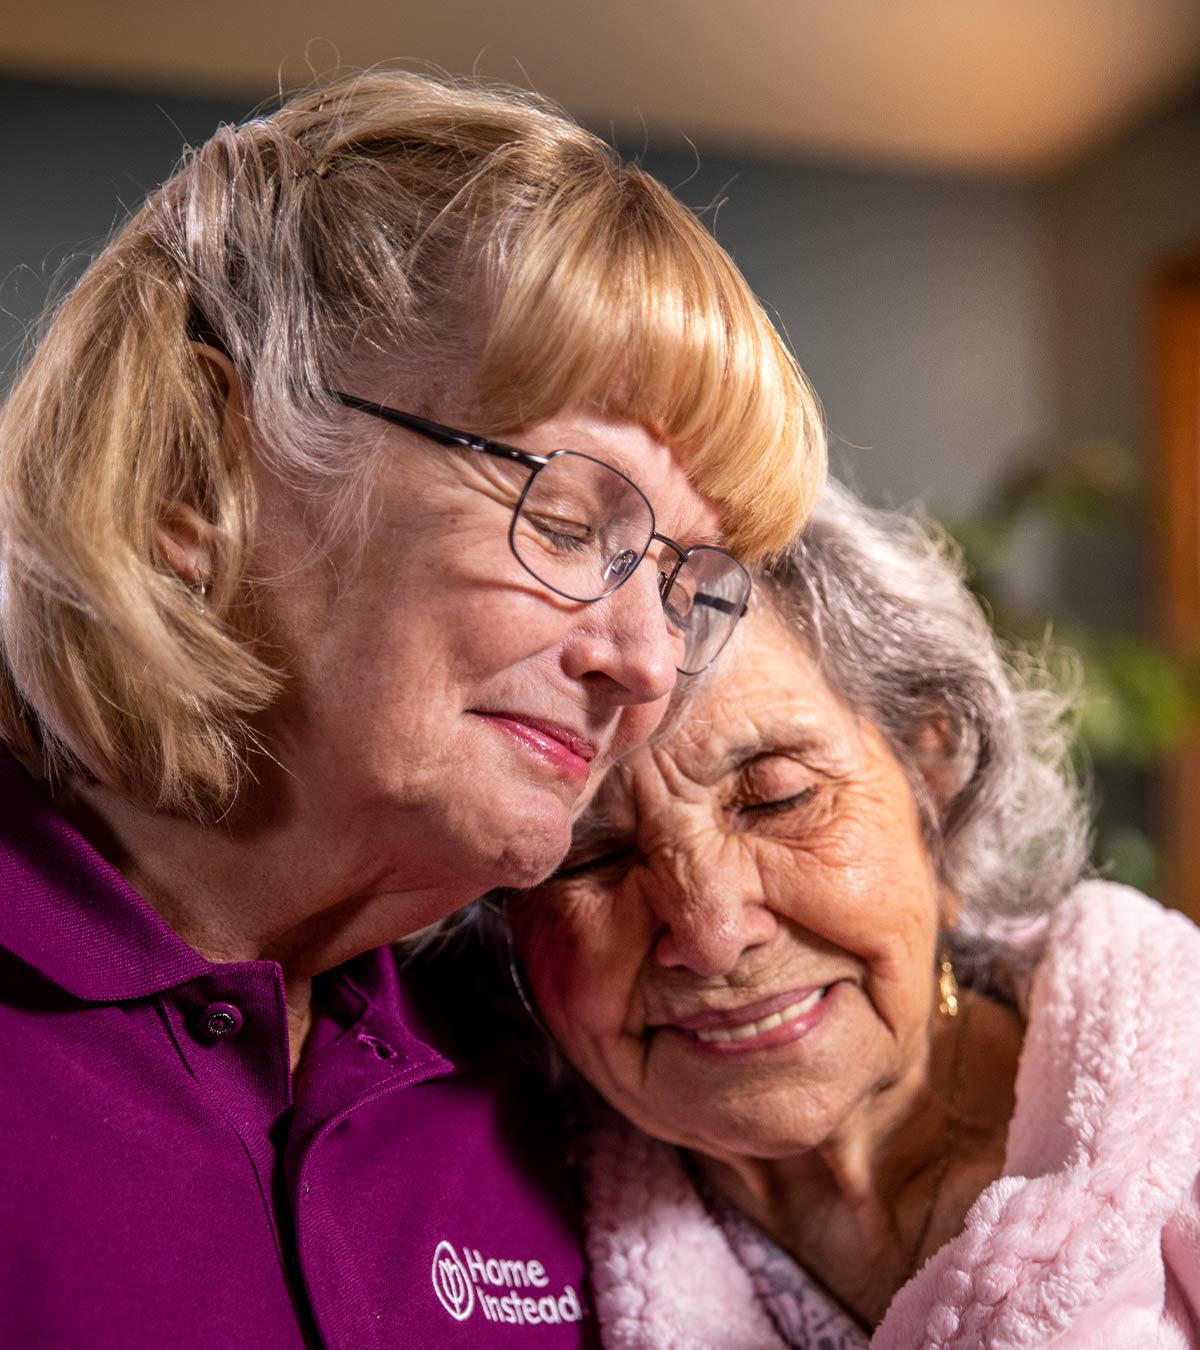 CAREGiver providing in-home senior care services. Home Instead of Chicago, IL provides Elder Care to aging adults. 